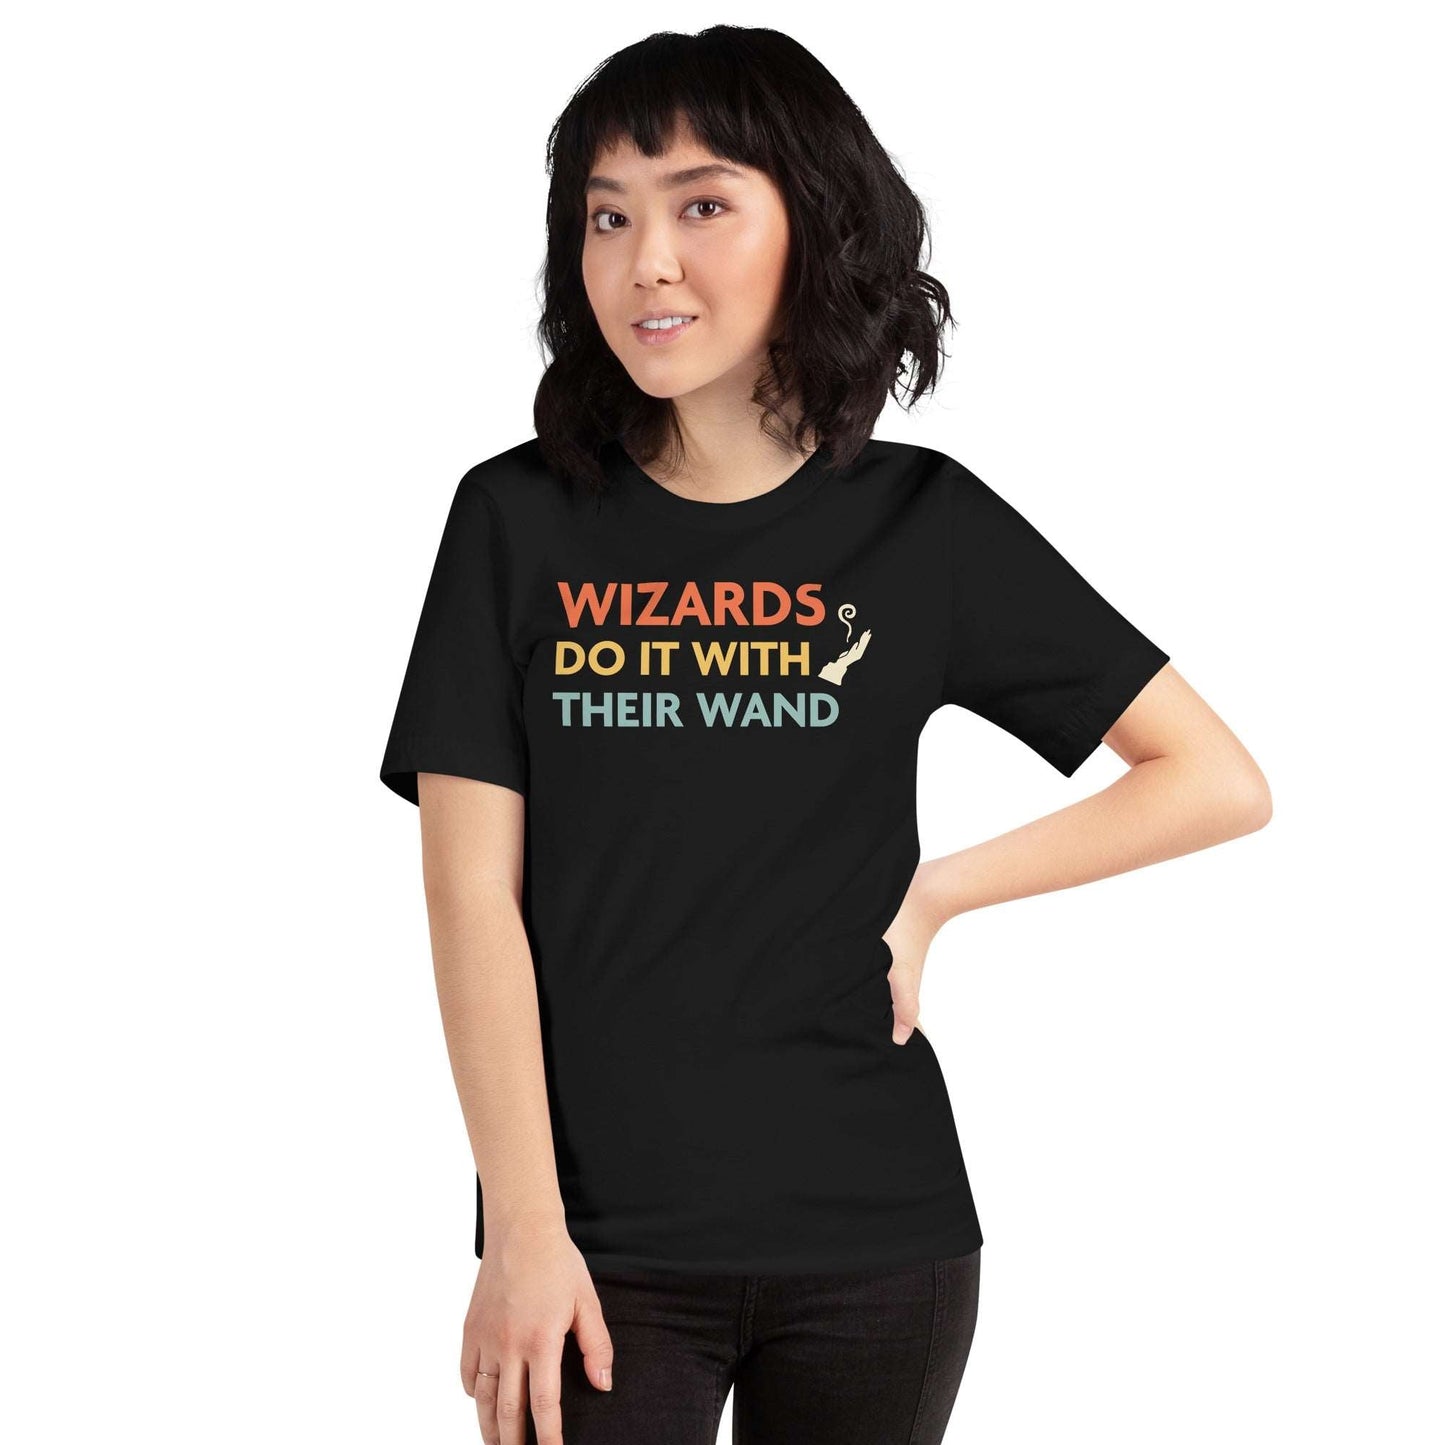 DnD Wizards Do It With Their Wand Shirt T-Shirt